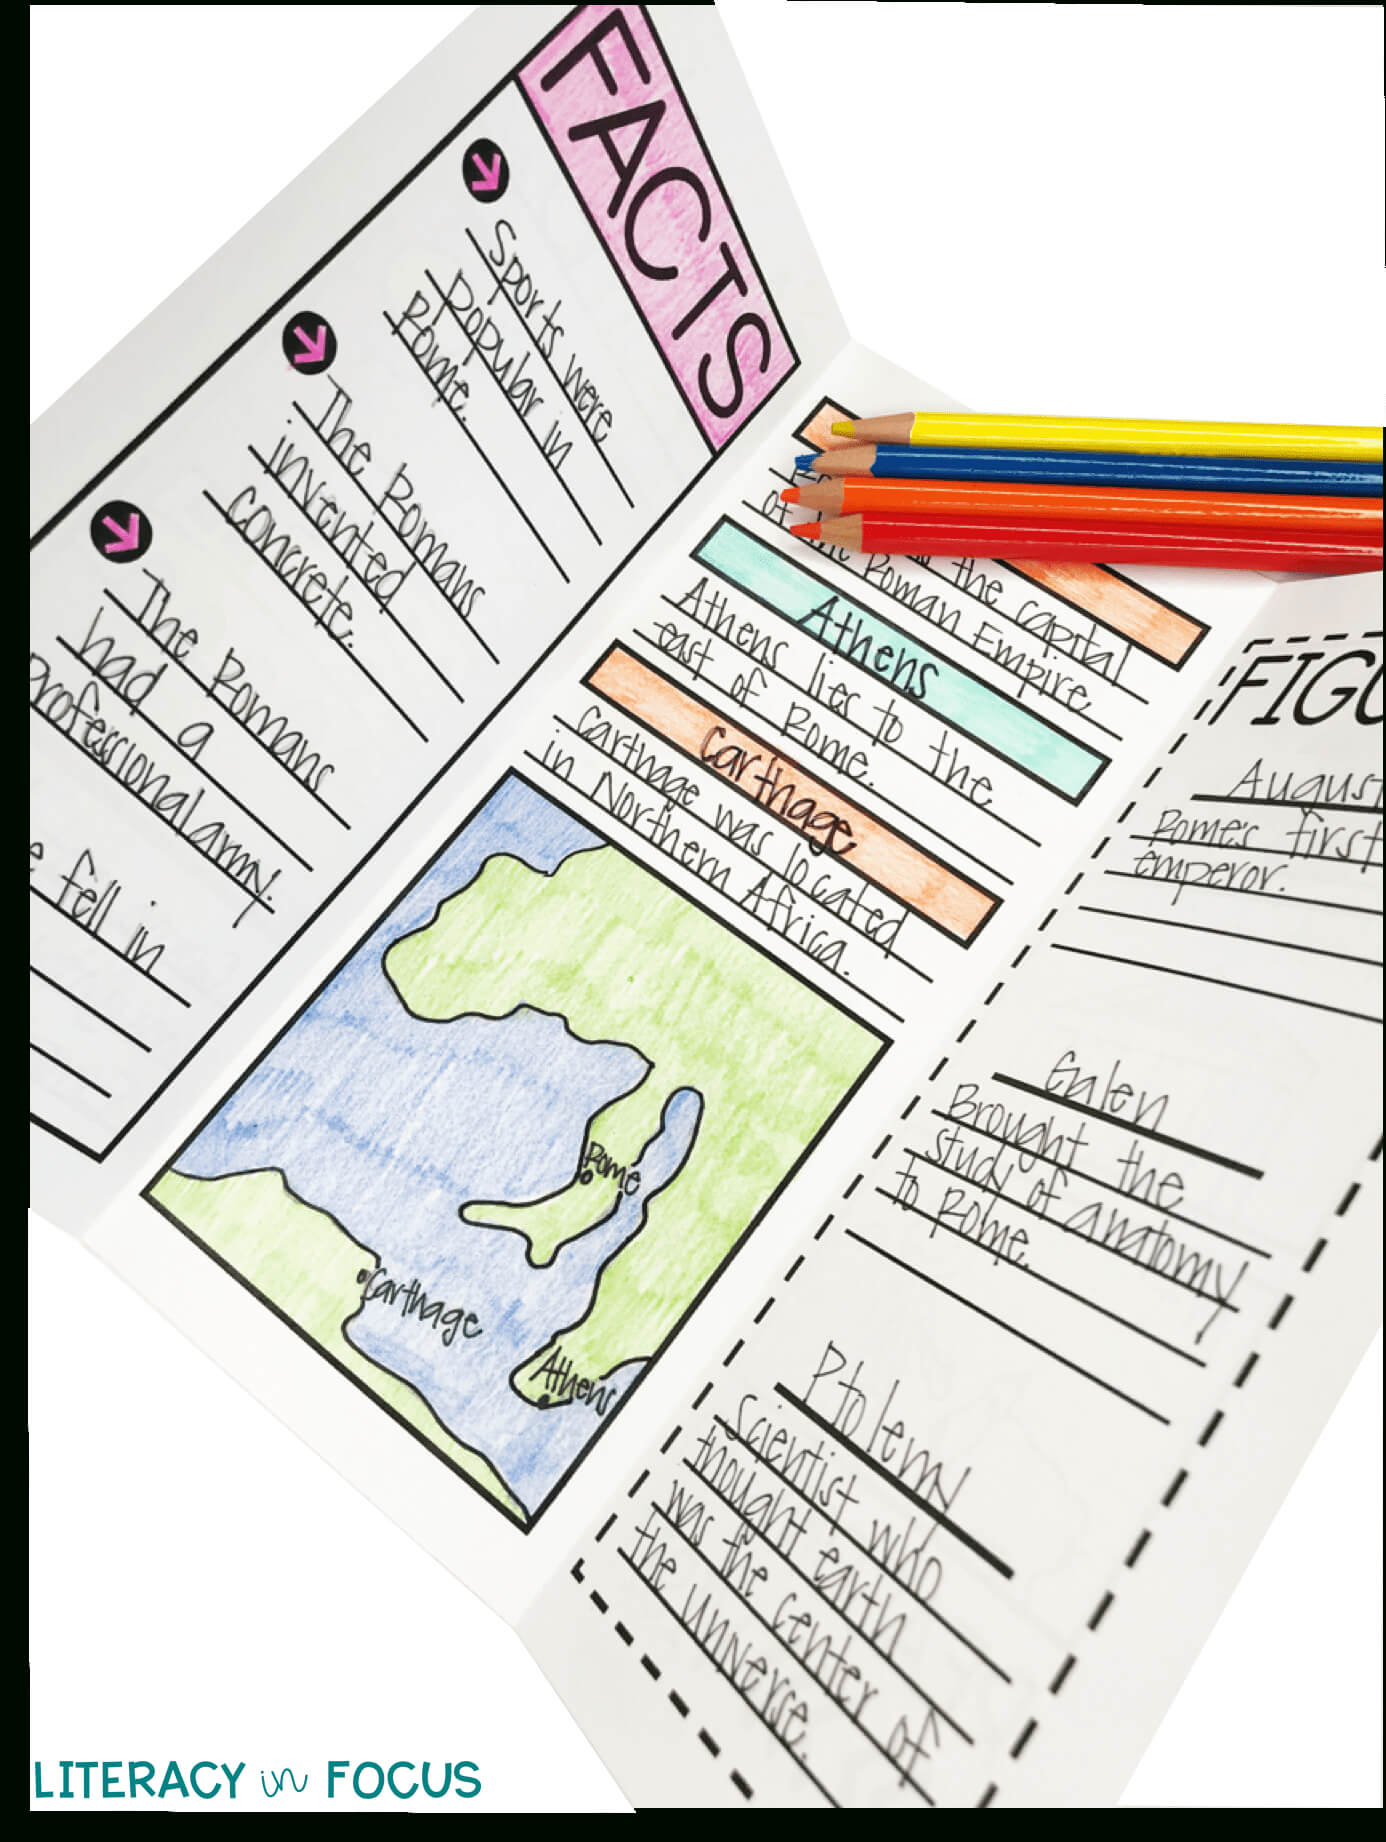 Historical Travel Brochure And Research Project | Literacy Regarding Brochure Rubric Template